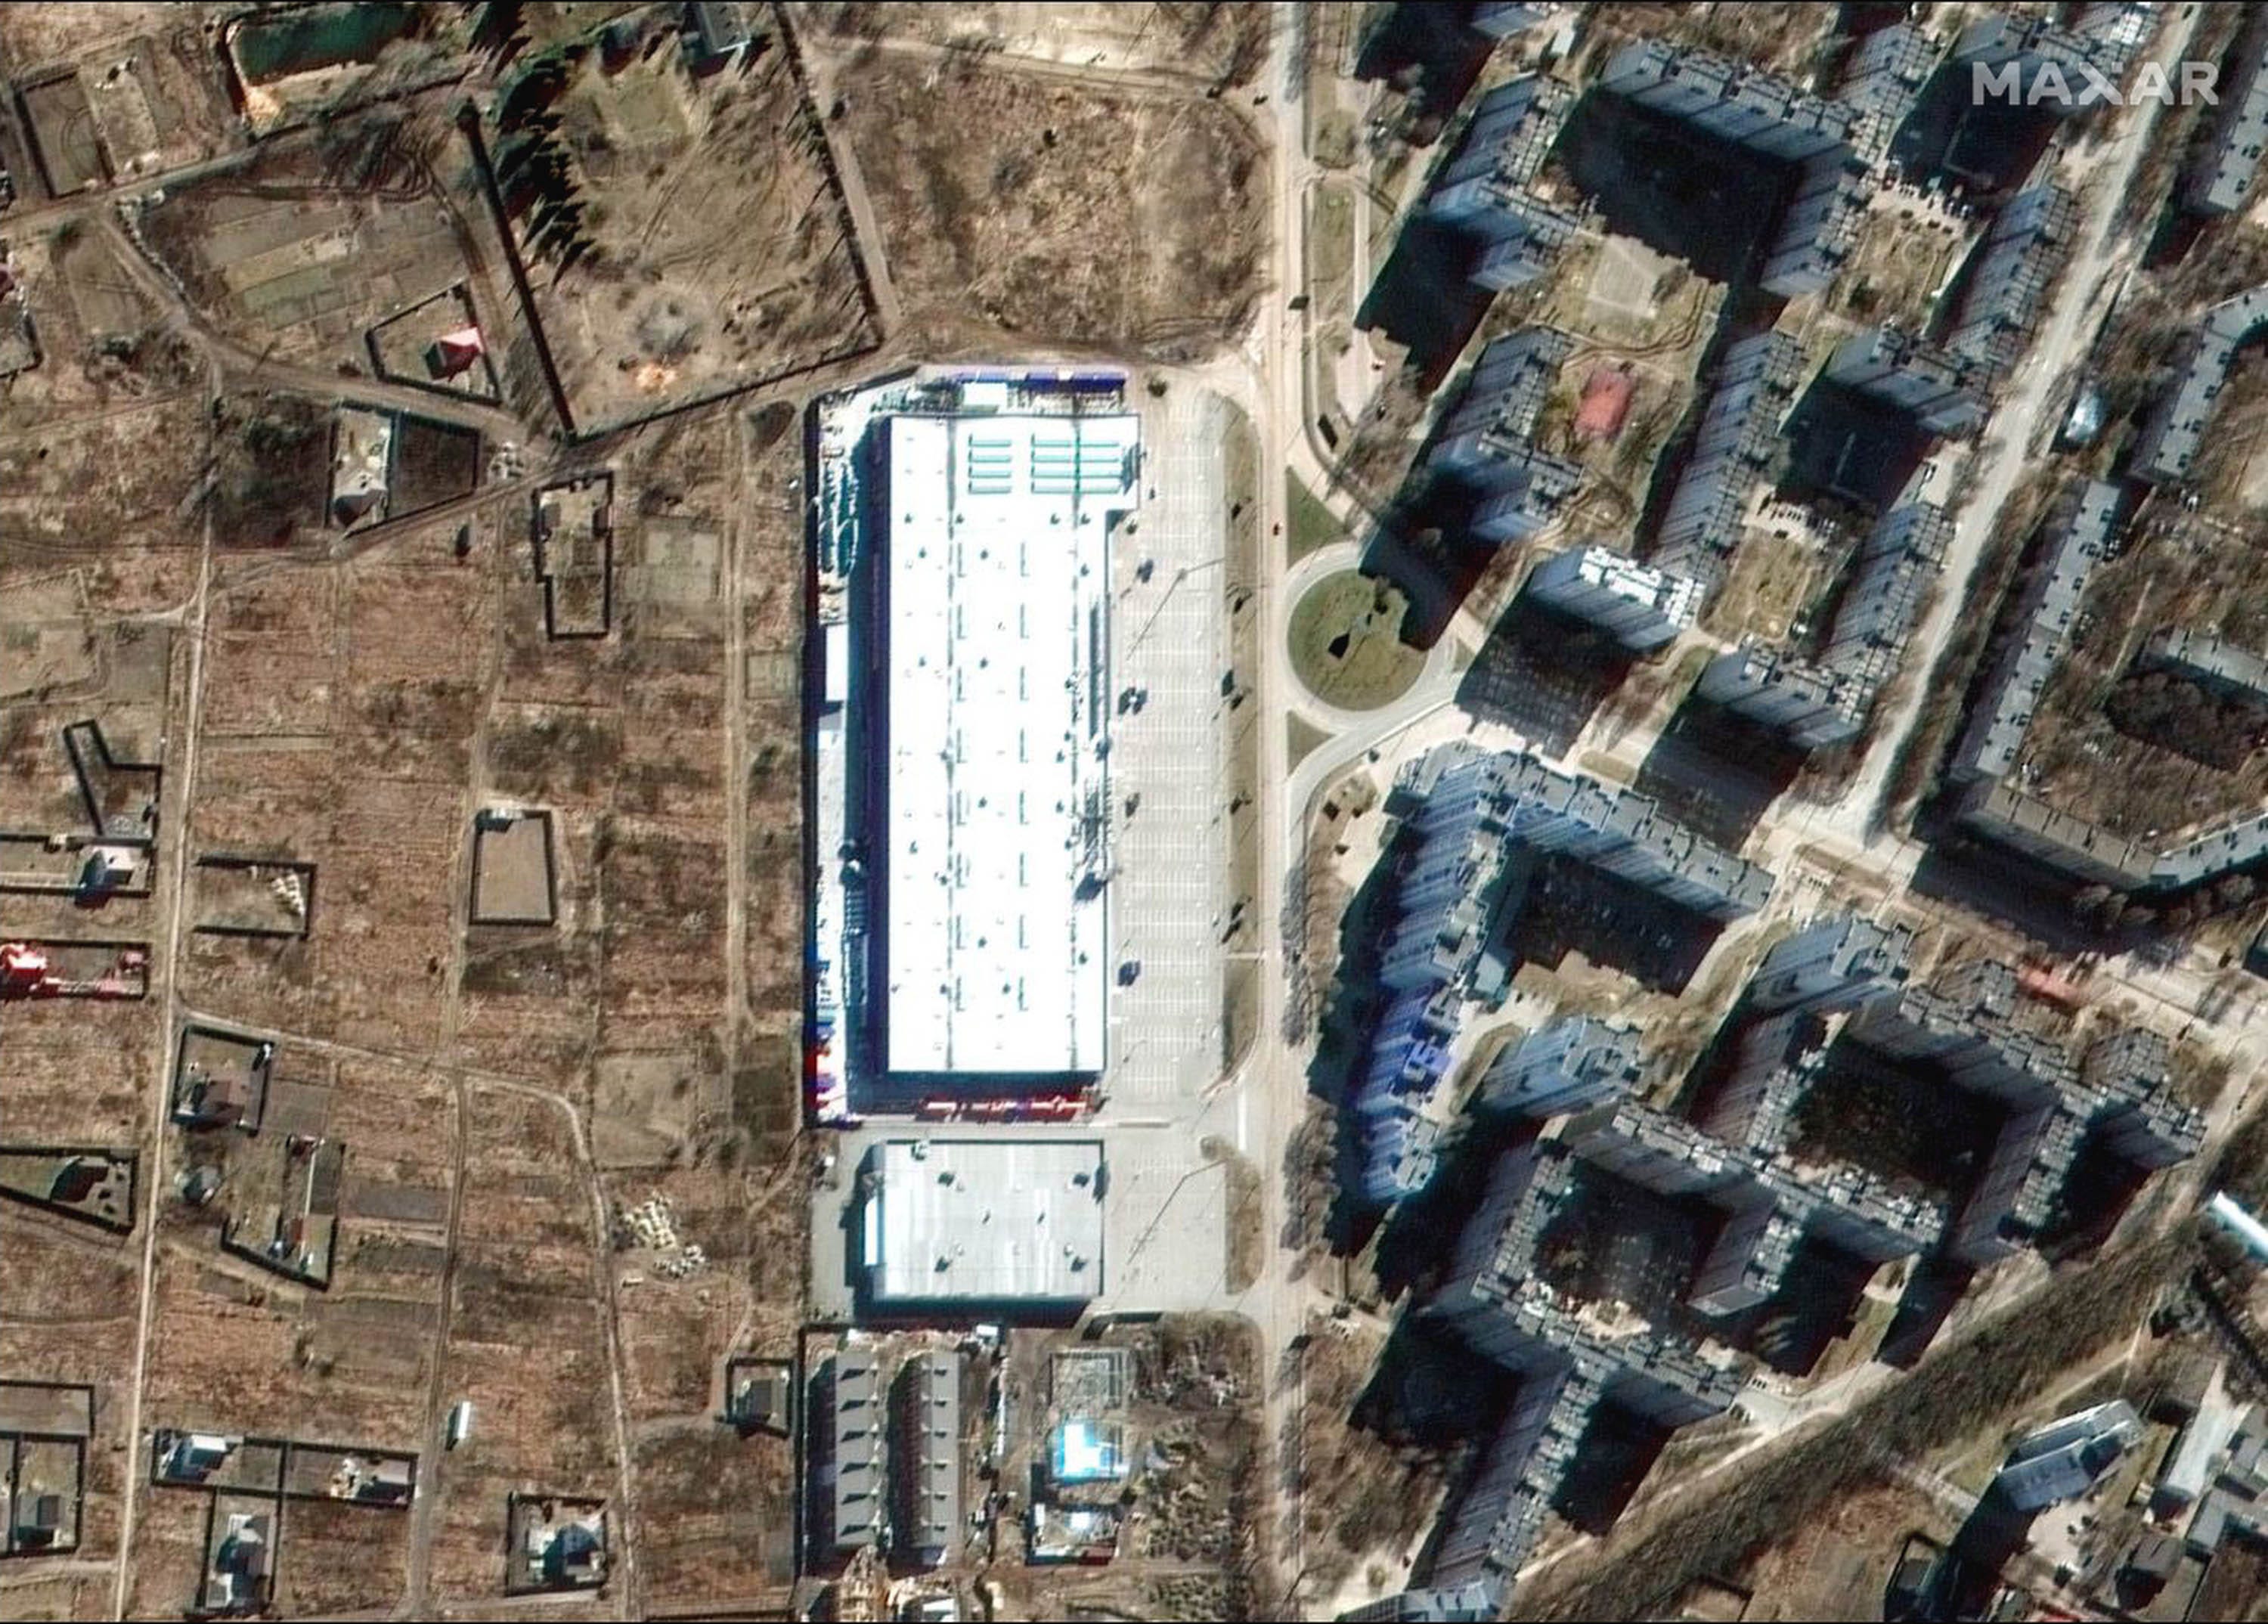 12_epicenter k shopping center_before damage_chernihiv ukraine_28feb2022_wv3



Media terms of use:
Print/web: Media may publish use these images with cutline photo credit “Satellite image ©2022 Maxar Technologies.” The watermark may not be removed/cropped.
Broadcast/video: Images used in video segments must have “Maxar” text applied to the image and visible for the duration that the images are on screen.
Social media: Images posted on social media must be credited on Twitter “[camera emoji]: @Maxar” or “image: @Maxar” in each post. Or via Instagram “[camera emoji}: @MaxarTechnologies” or  “image @MaxarTechnologies” in each post. [Via MerlinFTP Drop]